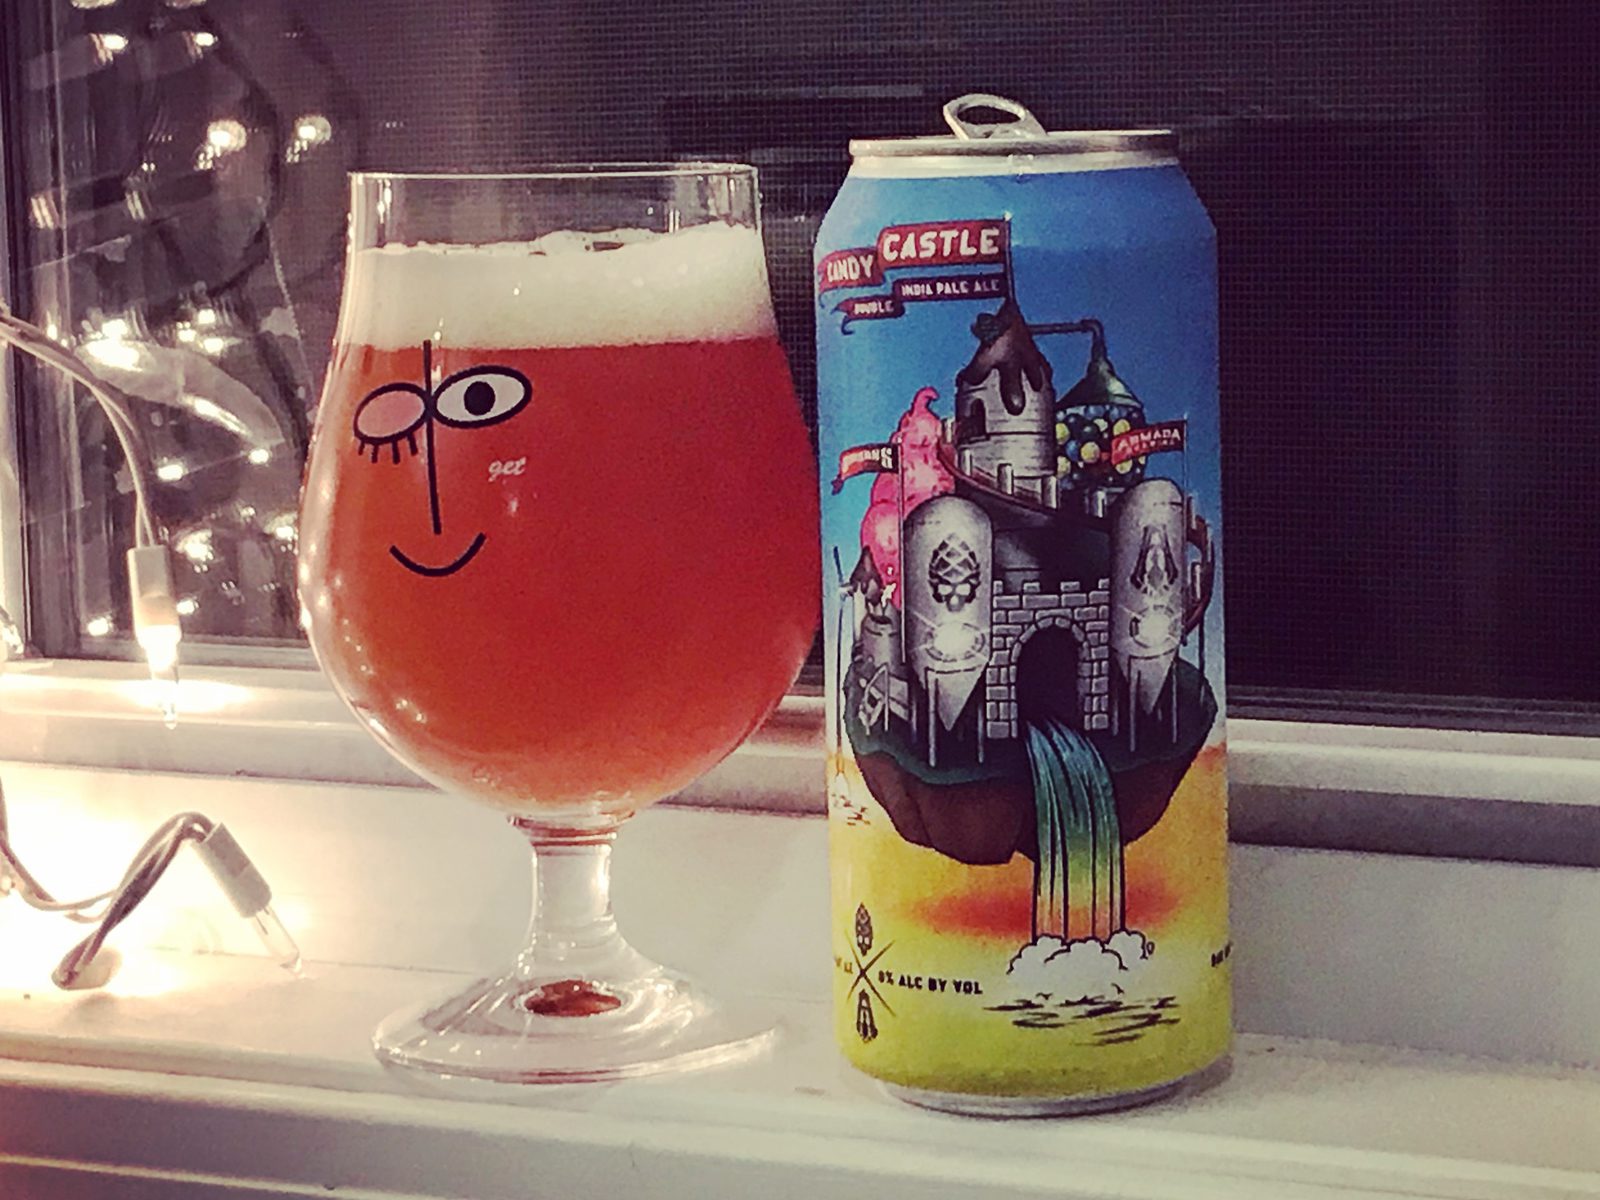 BAD SONS Beer Co. and Armada Brewing: Candy Castle